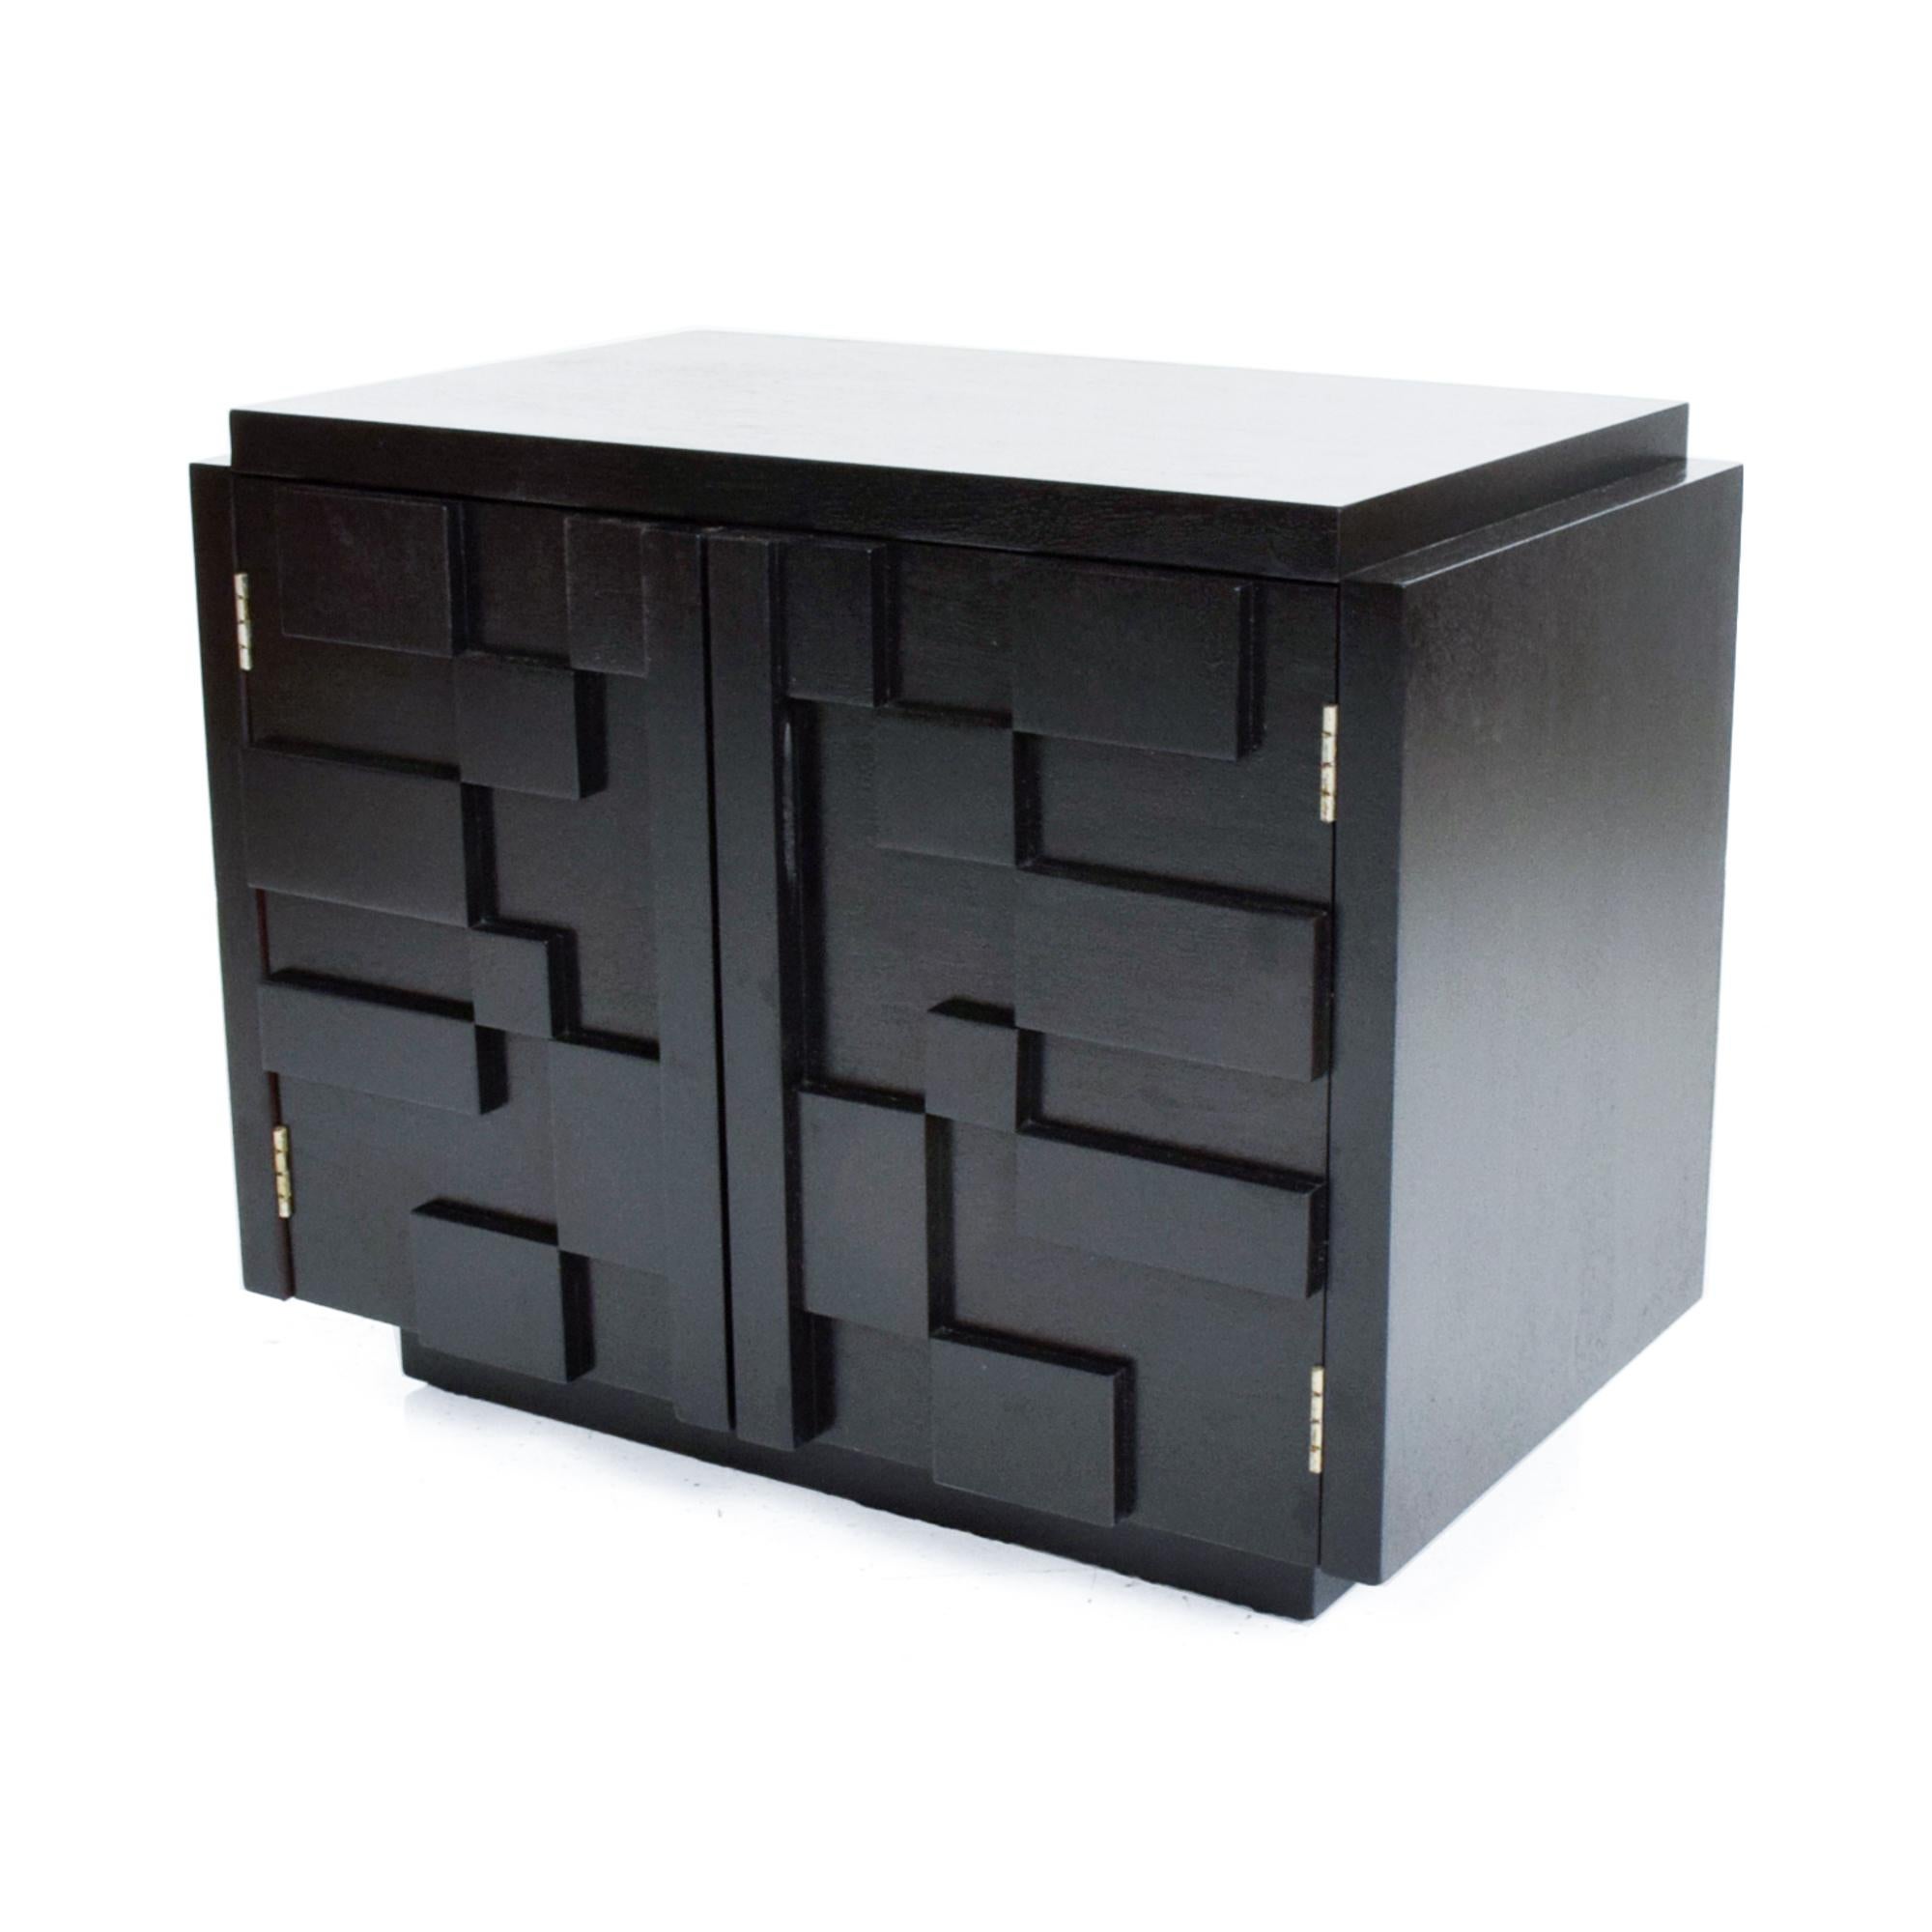 Mid-Century Modern Lane Brutalist nightstand in ebonized walnut wood.
Made by Lane of Altavista VA USA circa the 1970s. Inspired by Paul Evans.
Features two doors with detailed Mosaic patchwork and open storage.
Dimensions: 22.25 H x 27.75W x